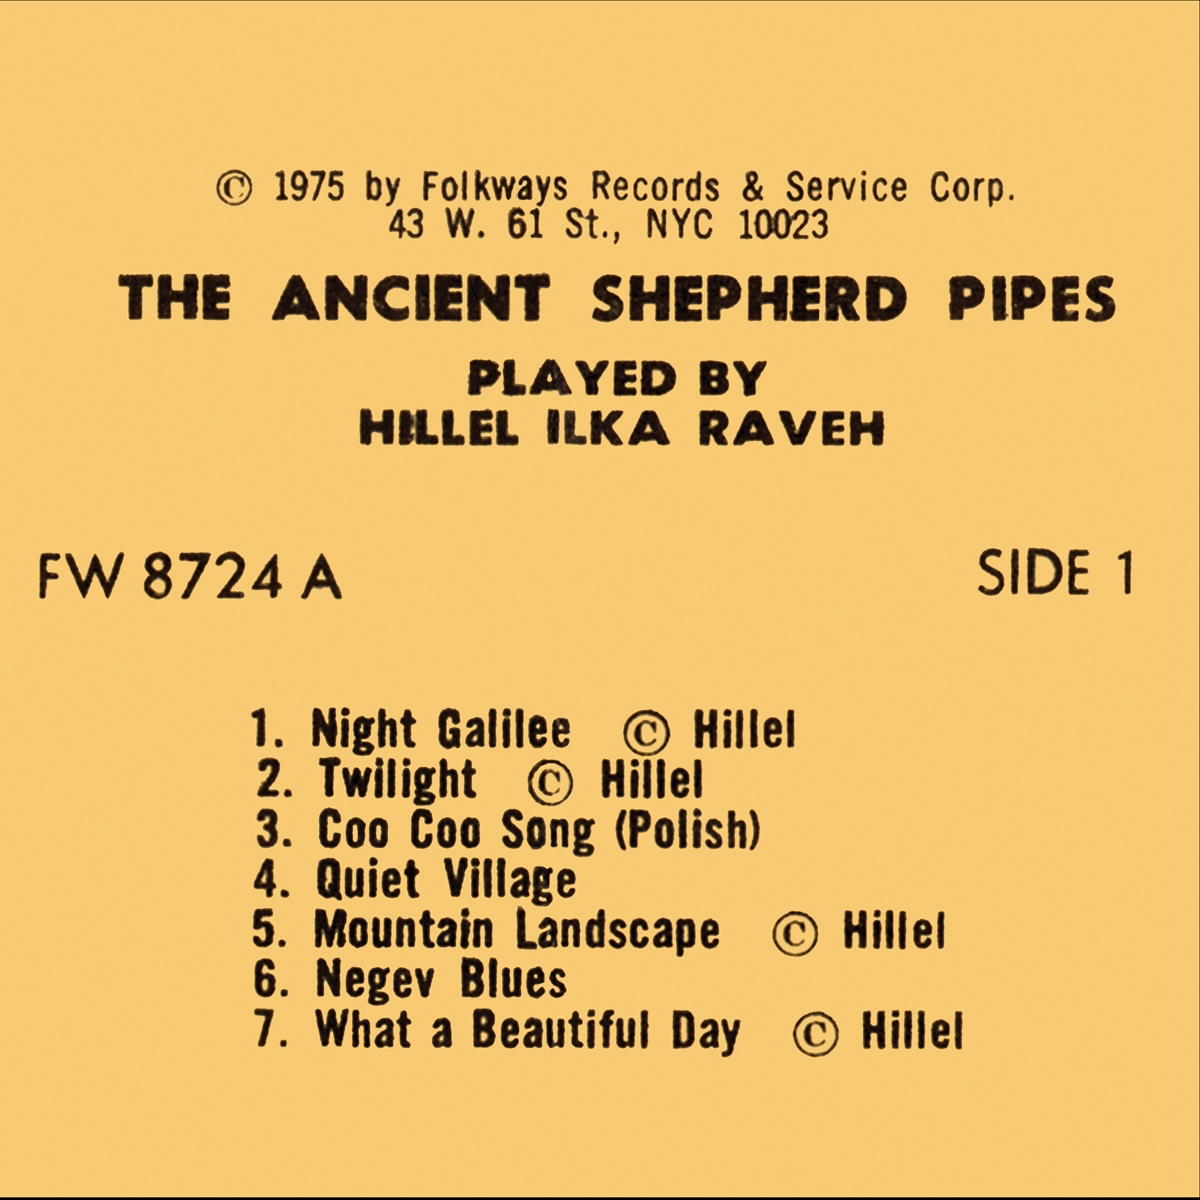 THE ANCIENT SHEPHERD PIPES